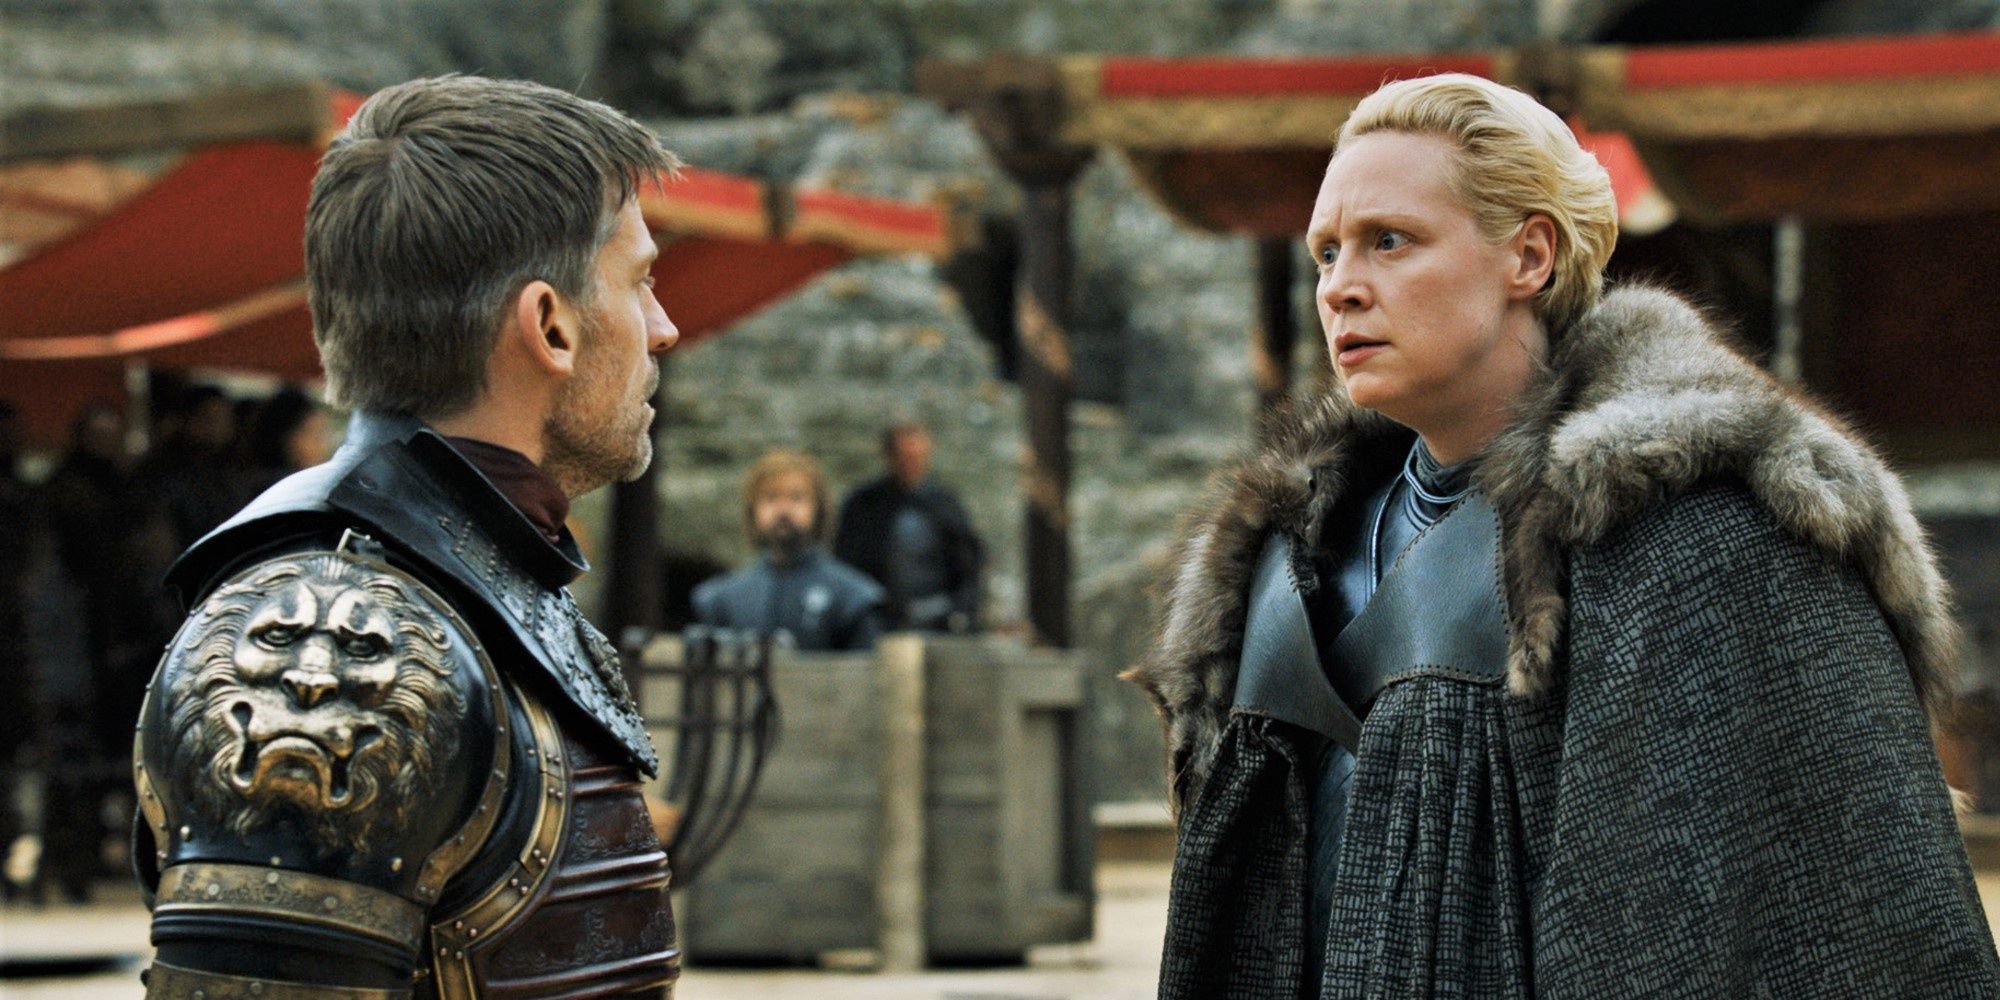 Brienne Of Tarth An Honorable Womans Journey In Game Of Thrones